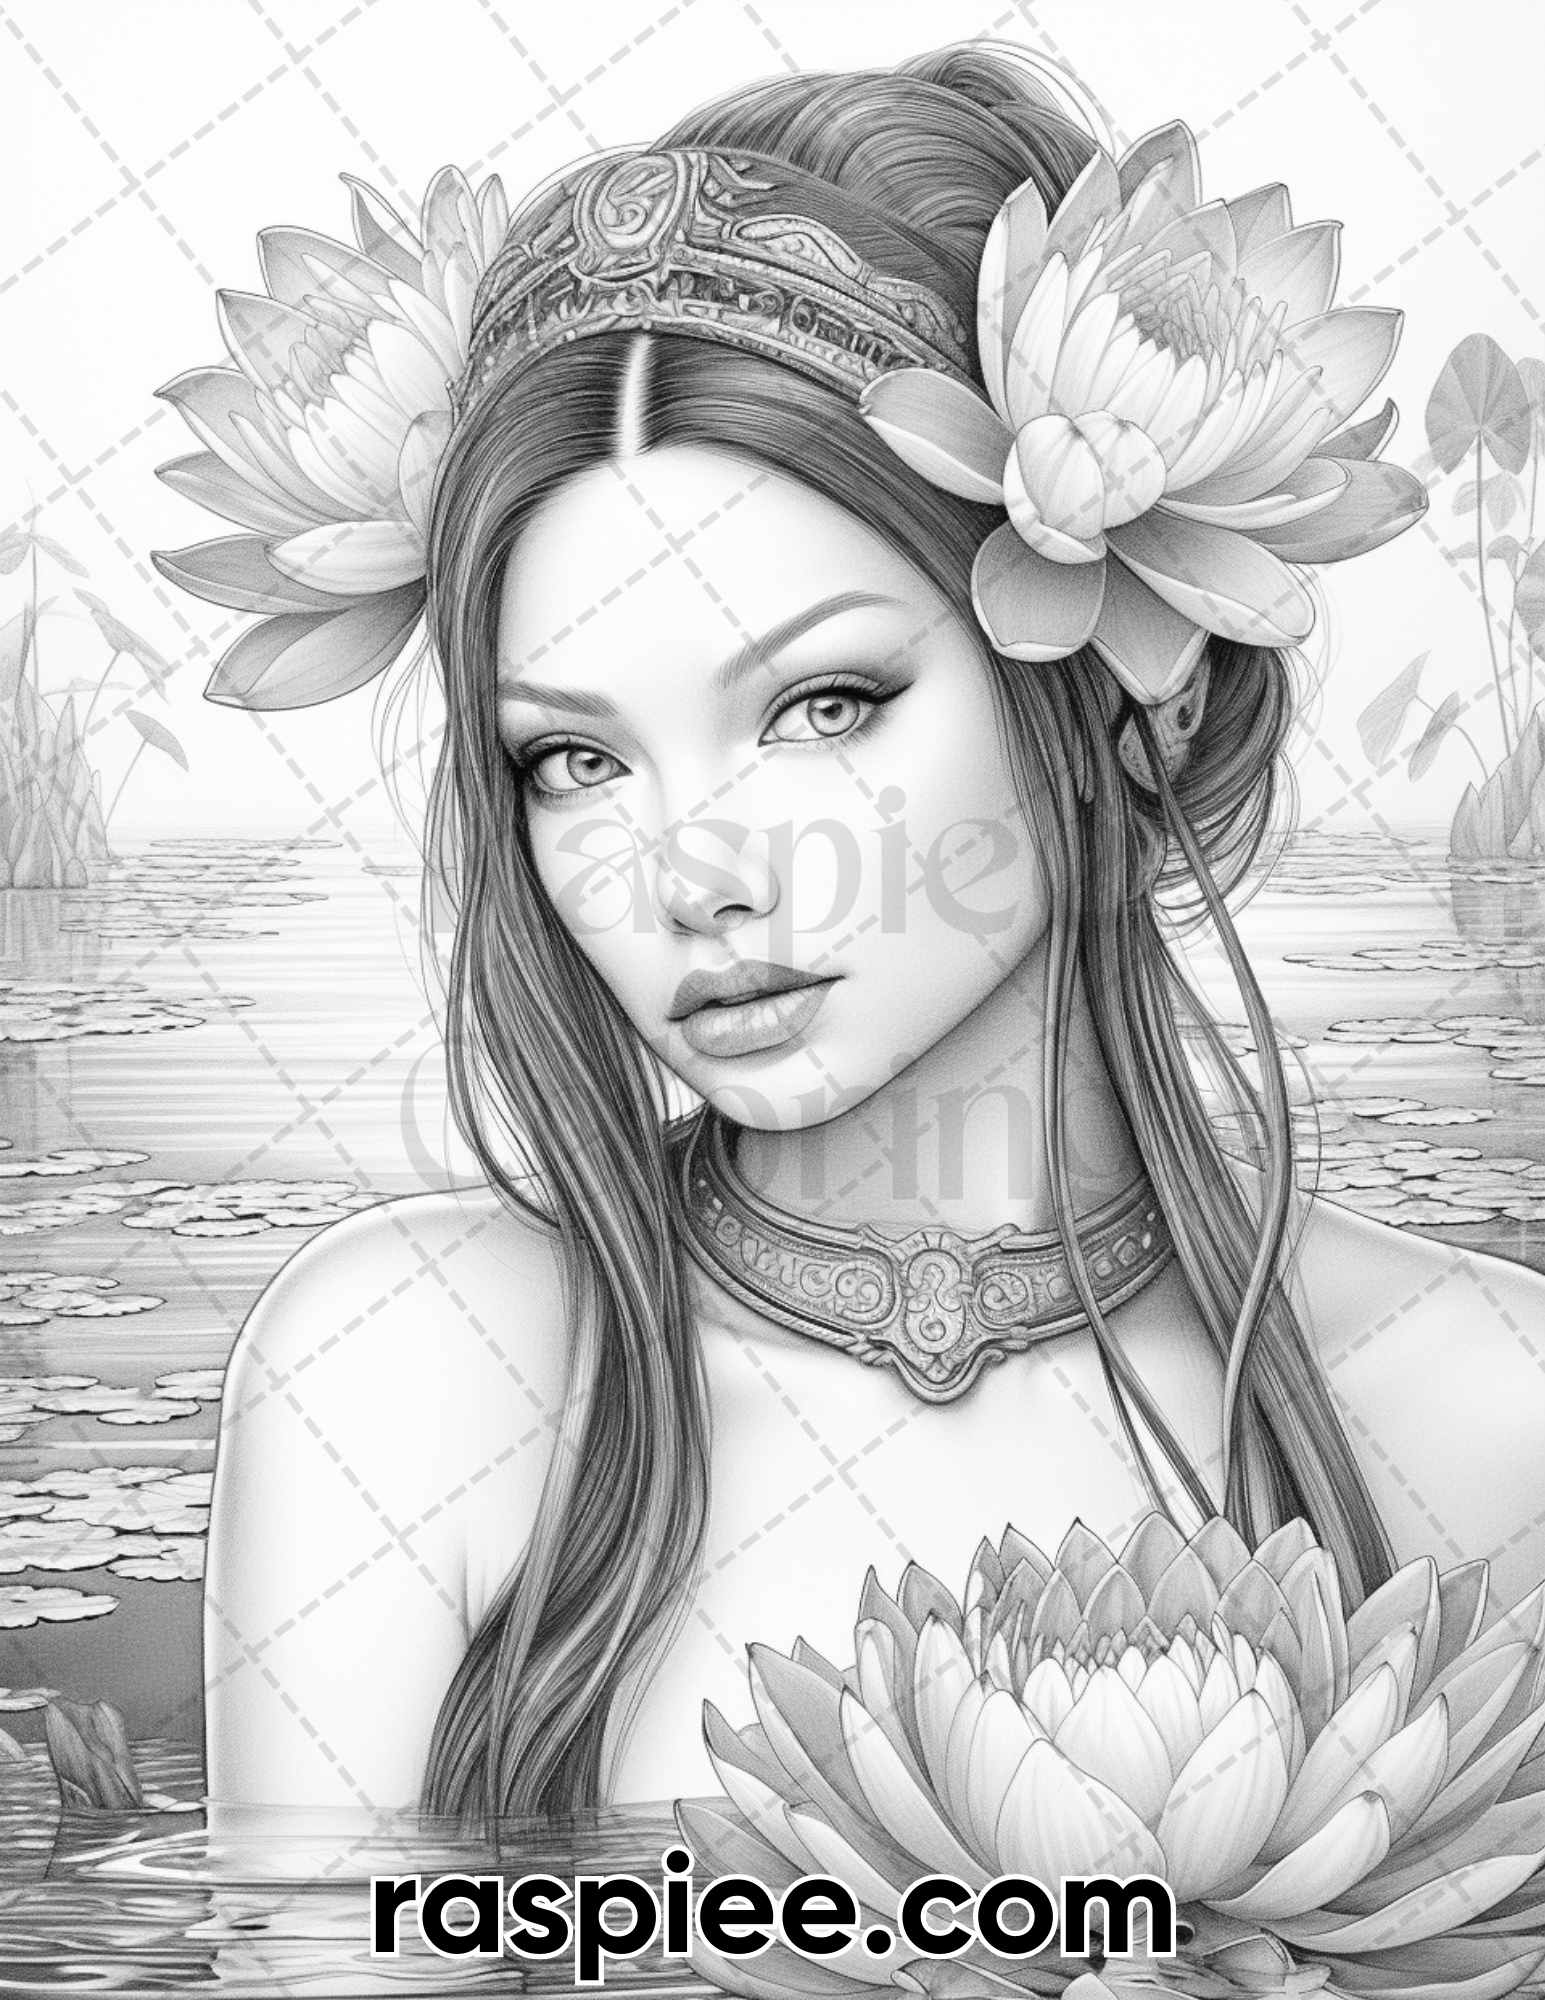 adult coloring pages, adult coloring sheets, adult coloring book pdf, adult coloring book printable, grayscale coloring pages, grayscale coloring books, portrait coloring pages, portrait coloring book, flower coloring pages for adults, flower coloring book pdf, spring coloring pages for adults, spring coloring book pdf